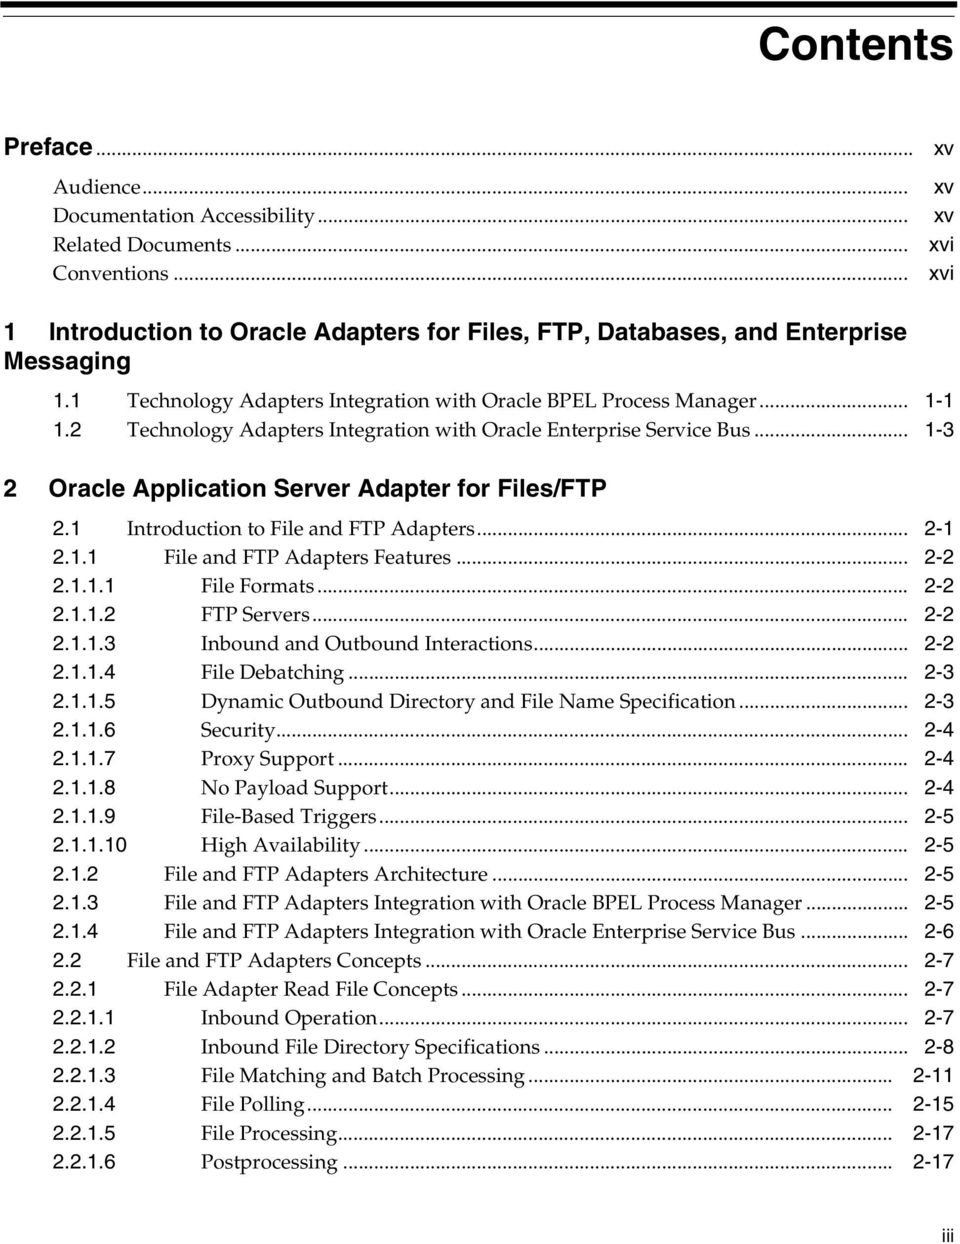 2 Technology Adapters Integration with Oracle Enterprise Service Bus... 1-3 2 Oracle Application Server Adapter for Files/FTP 2.1 Introduction to File and FTP Adapters... 2-1 2.1.1 File and FTP Adapters Features.